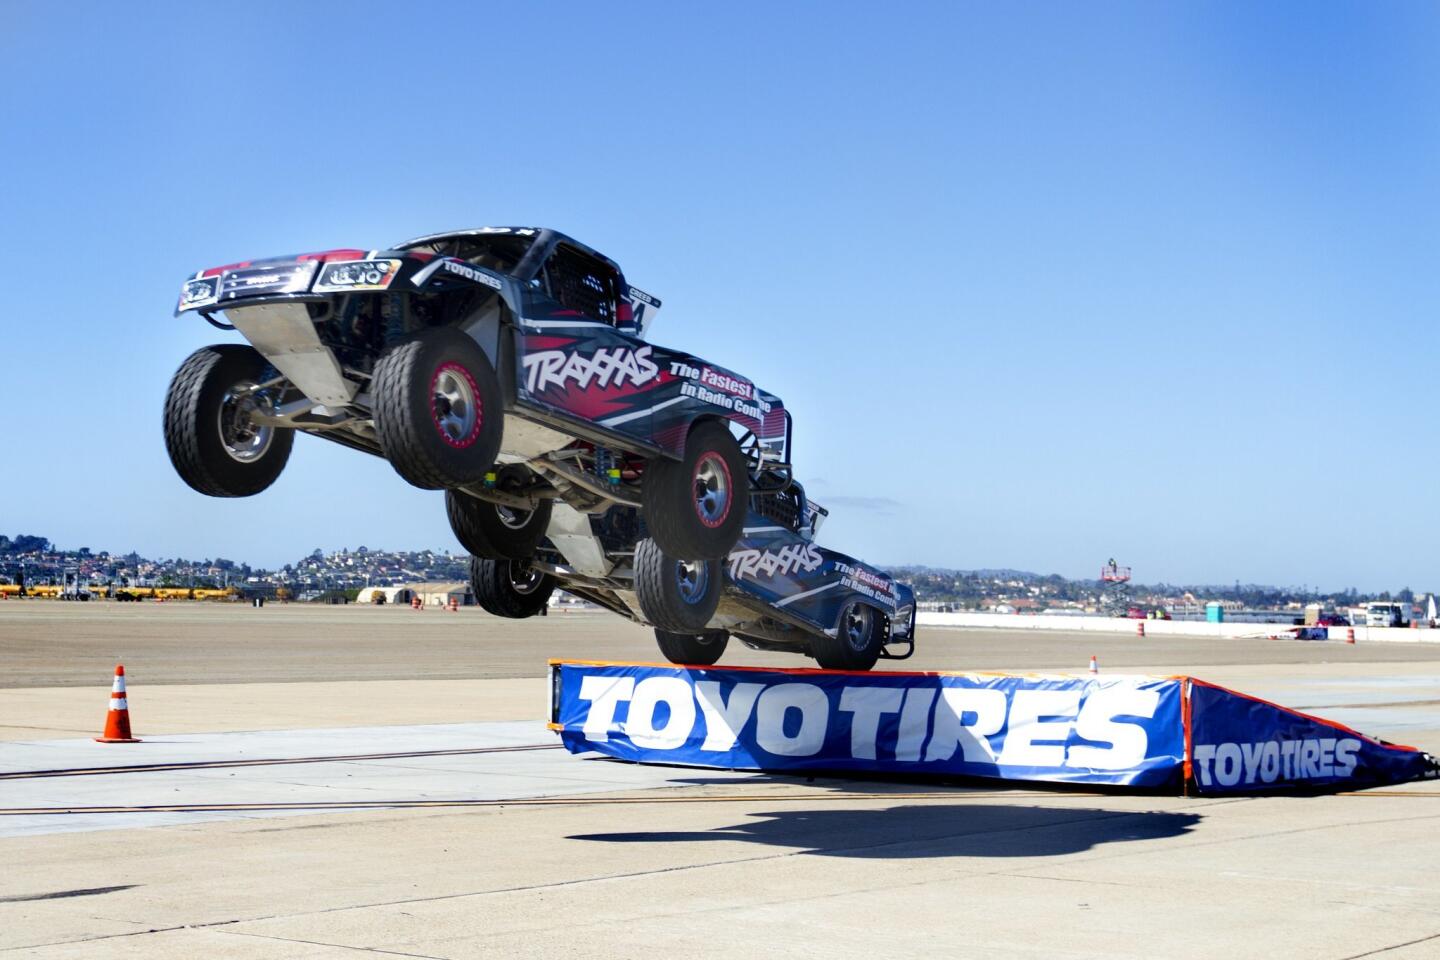 Two high-performance trucks cadapult off a ramp at high speeds.